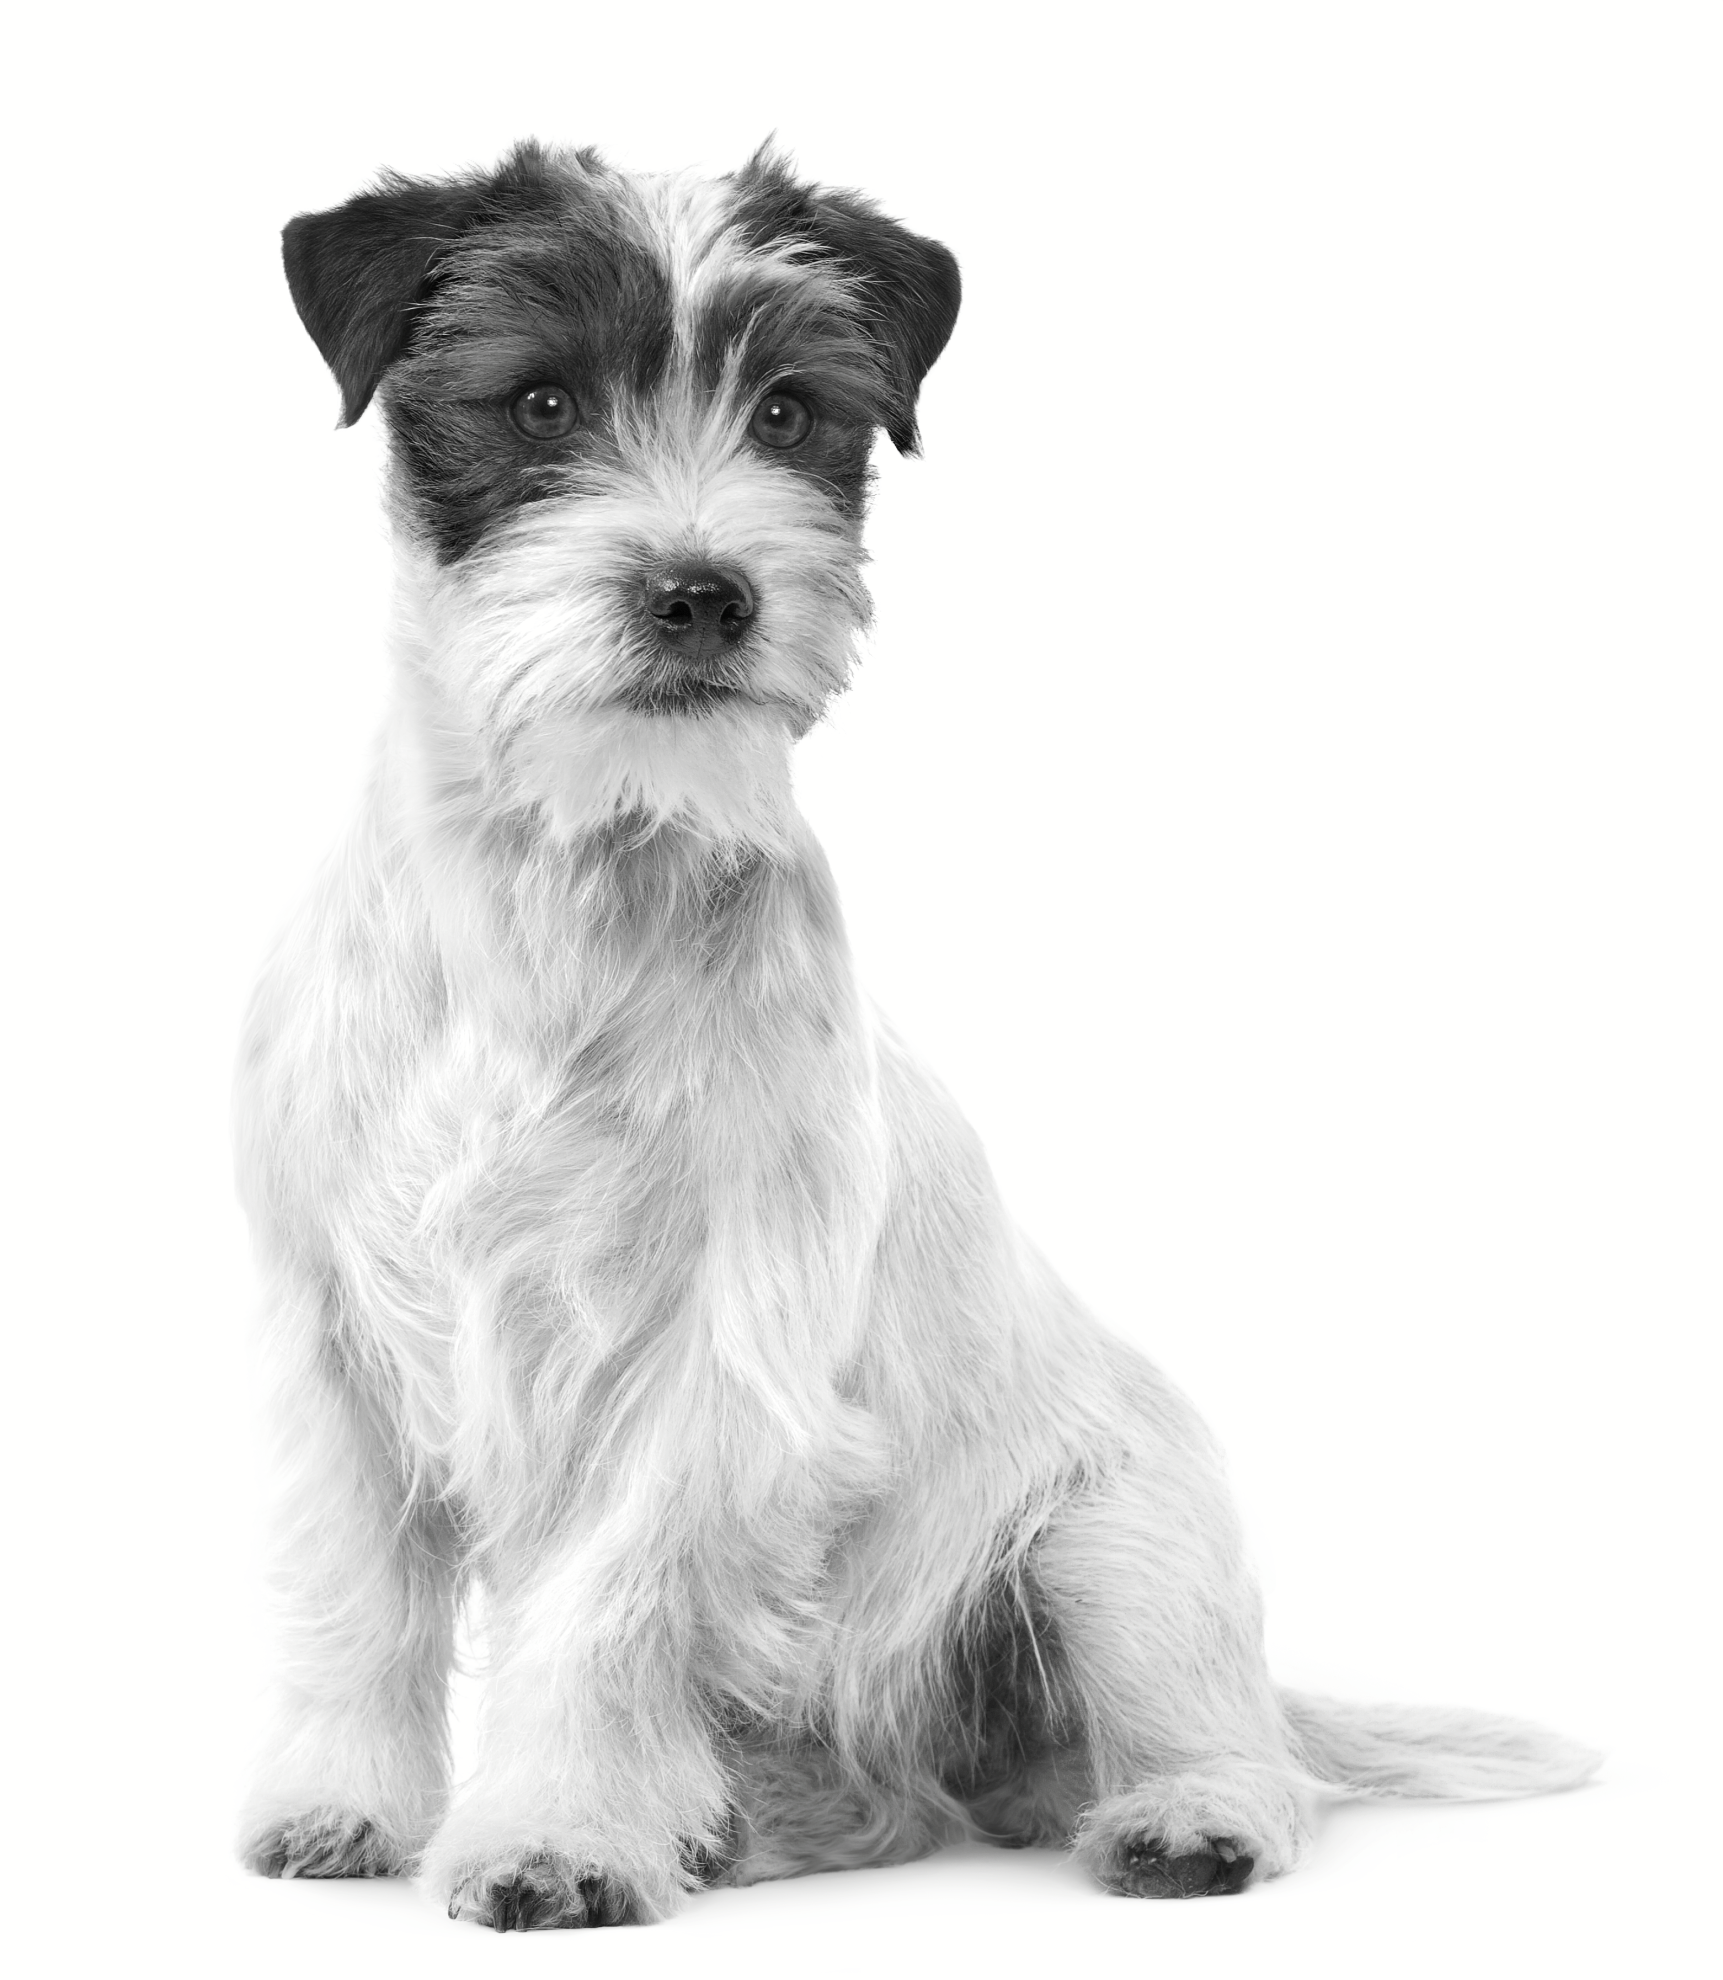 Black and white adult Jack Russel Terrier sitting